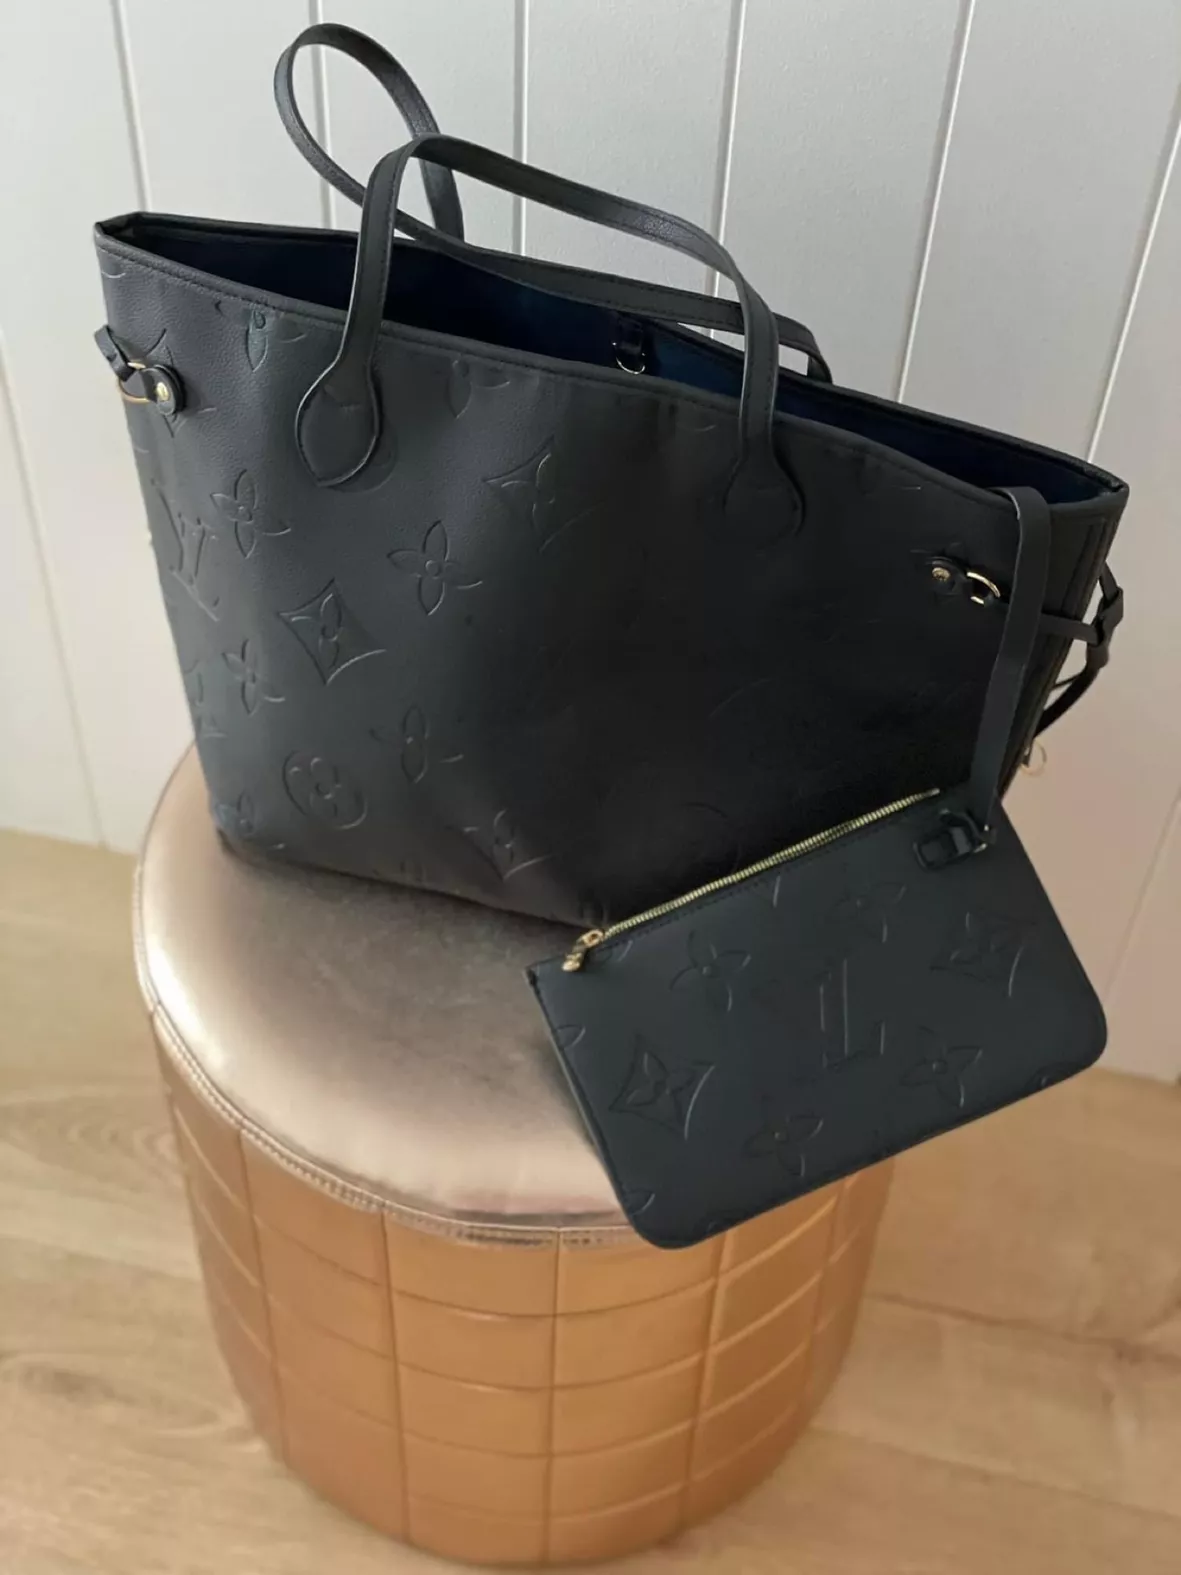 Review of the Louis Vuitton NEVERFULL dupe by the brand